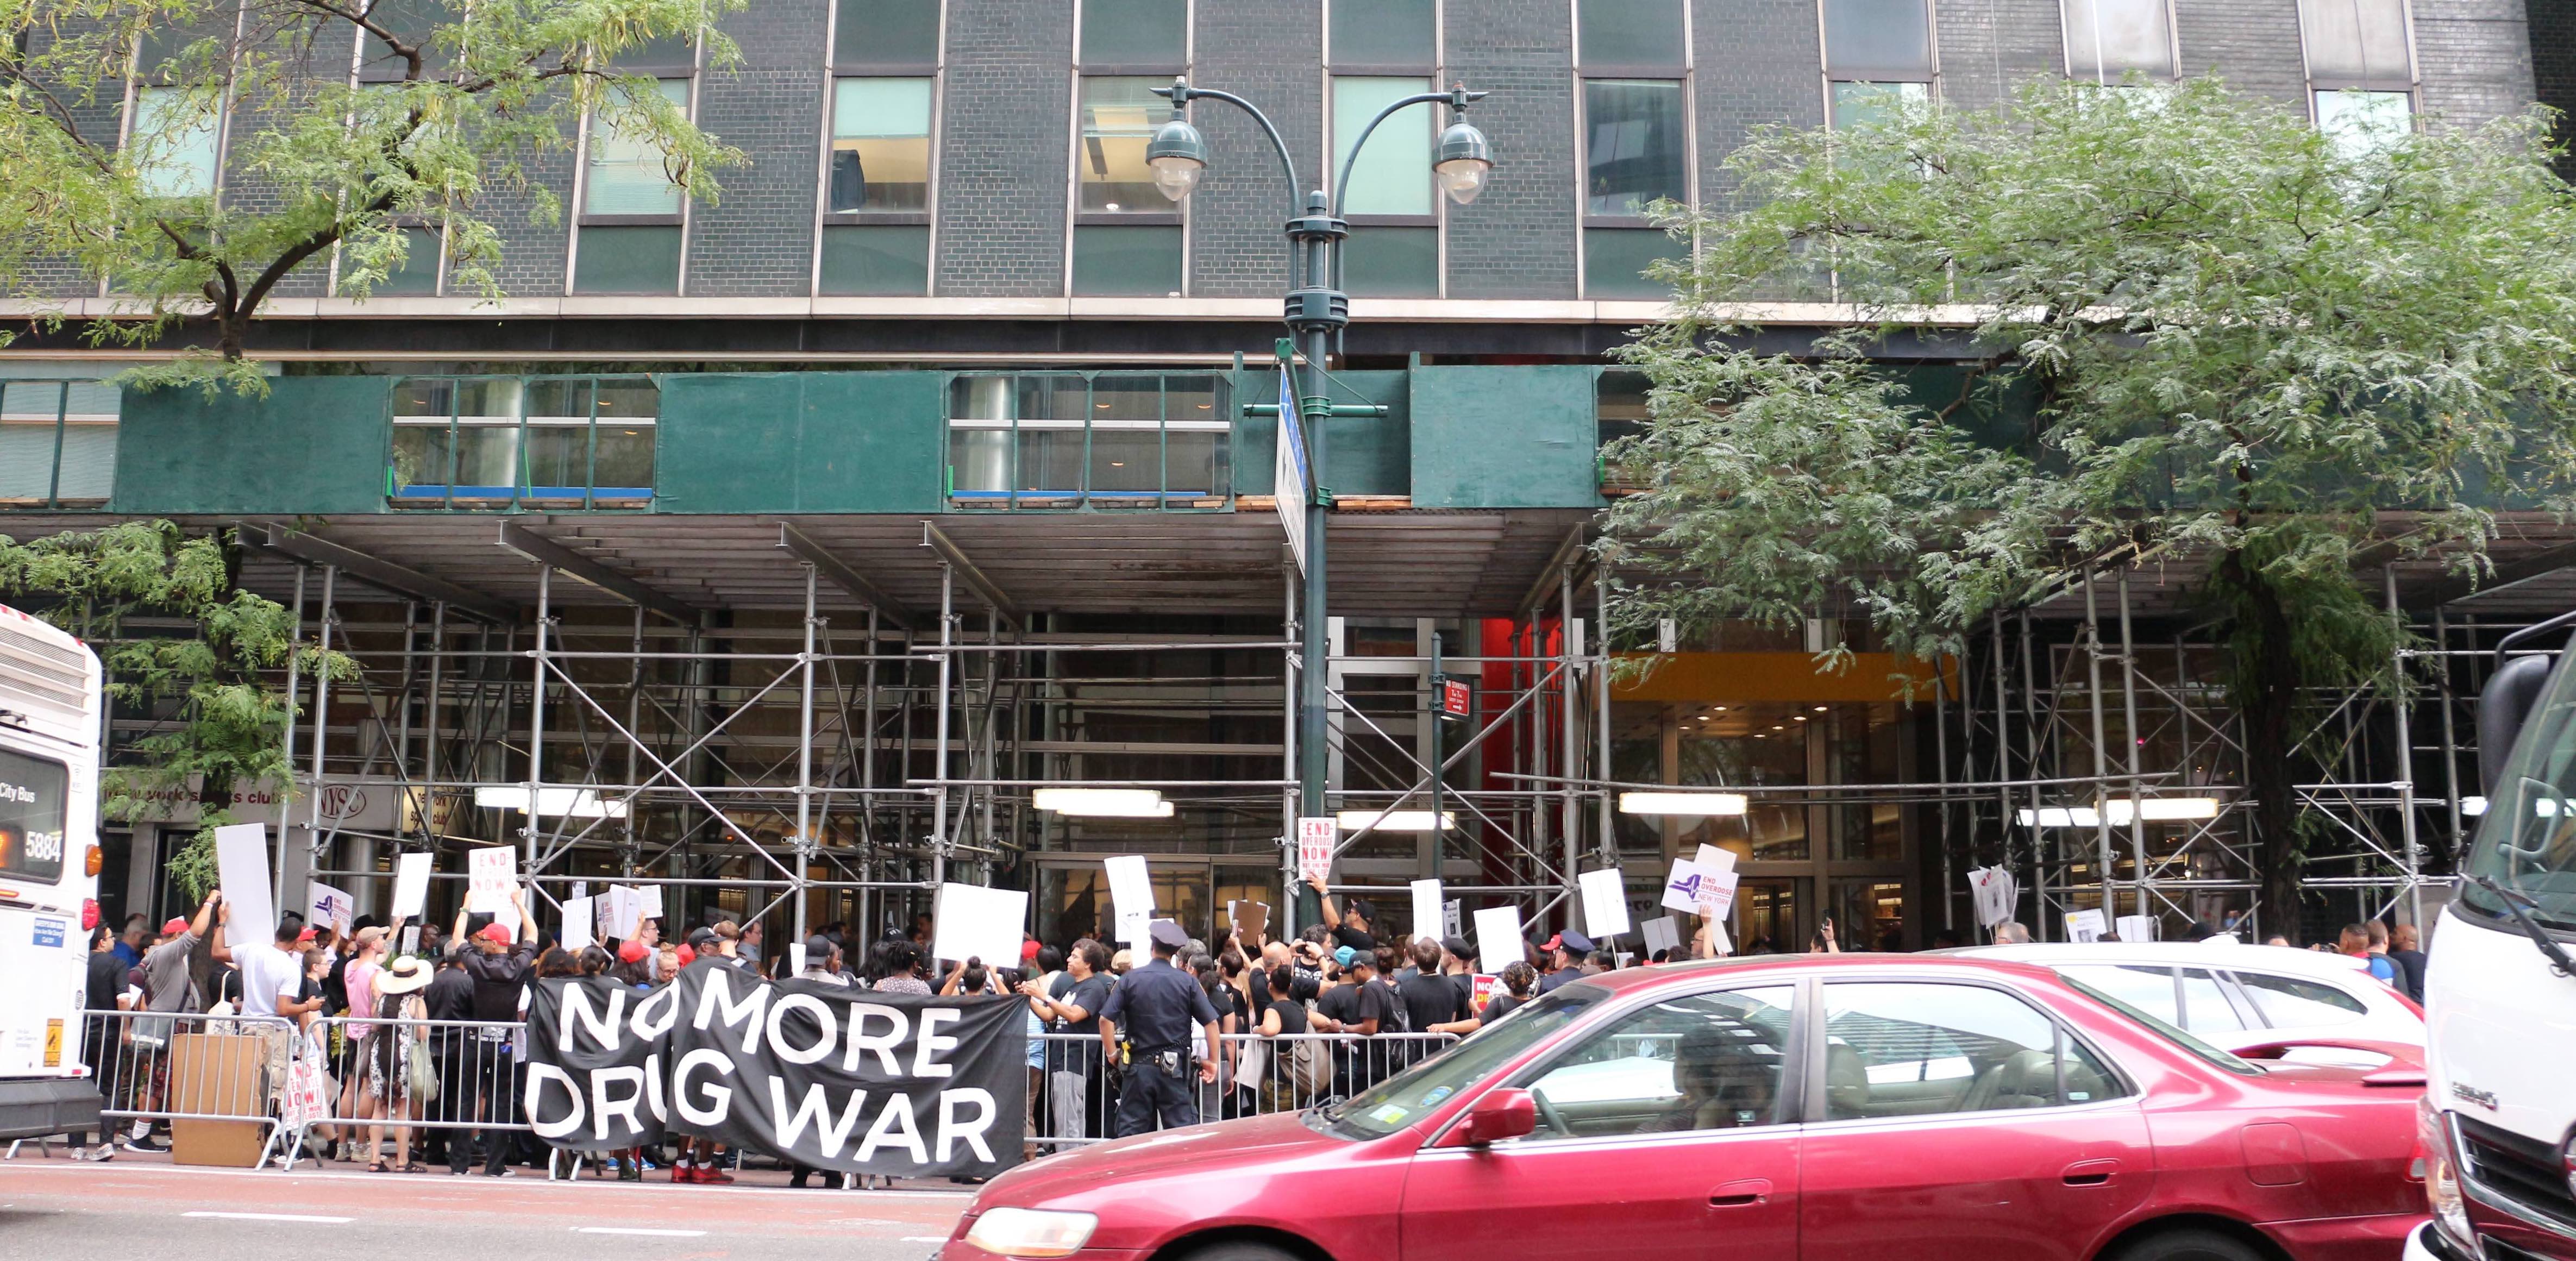 A group of protestors hold a banner outside a building. The banner reads 'NO MORE DRUG WAR'.